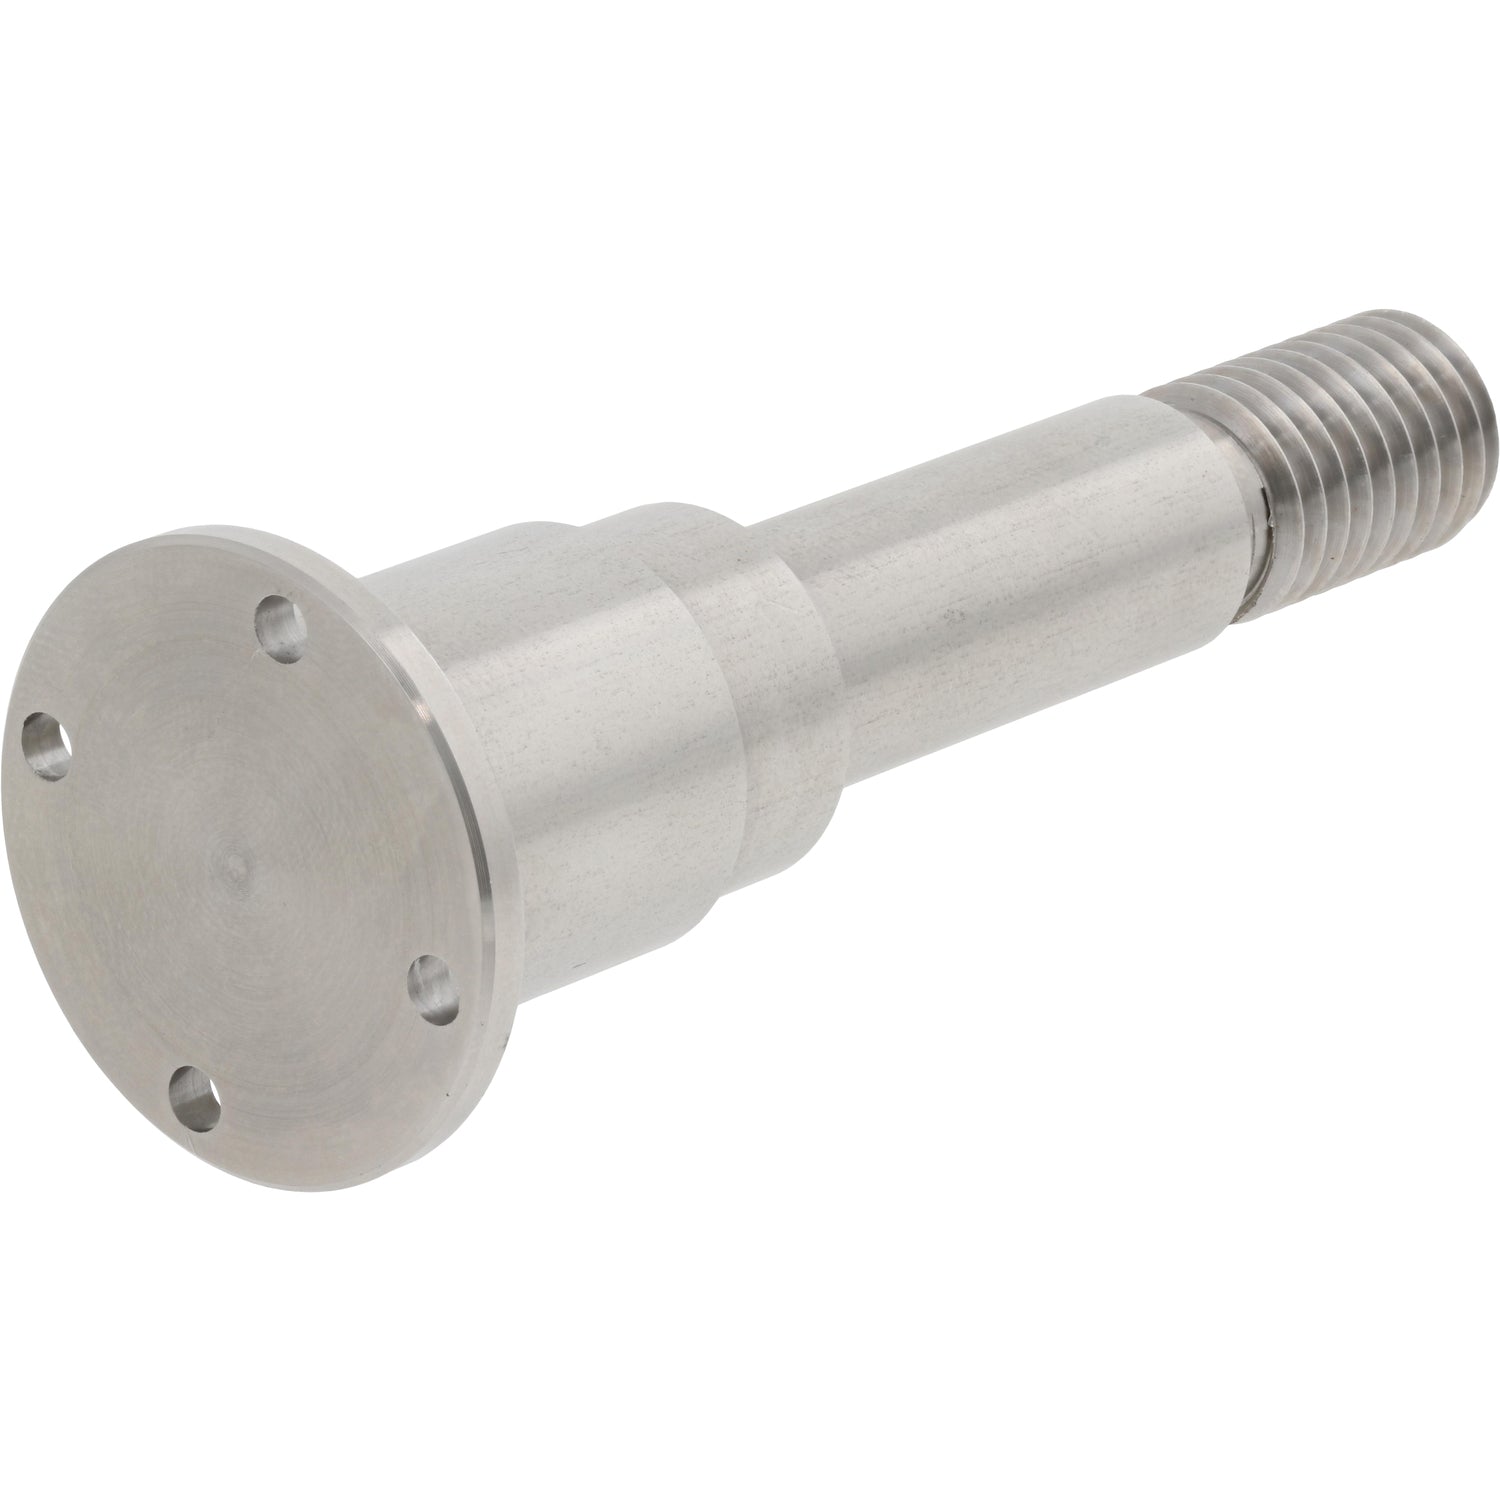 Stainless steel pivot shaft with threaded end on white background. 